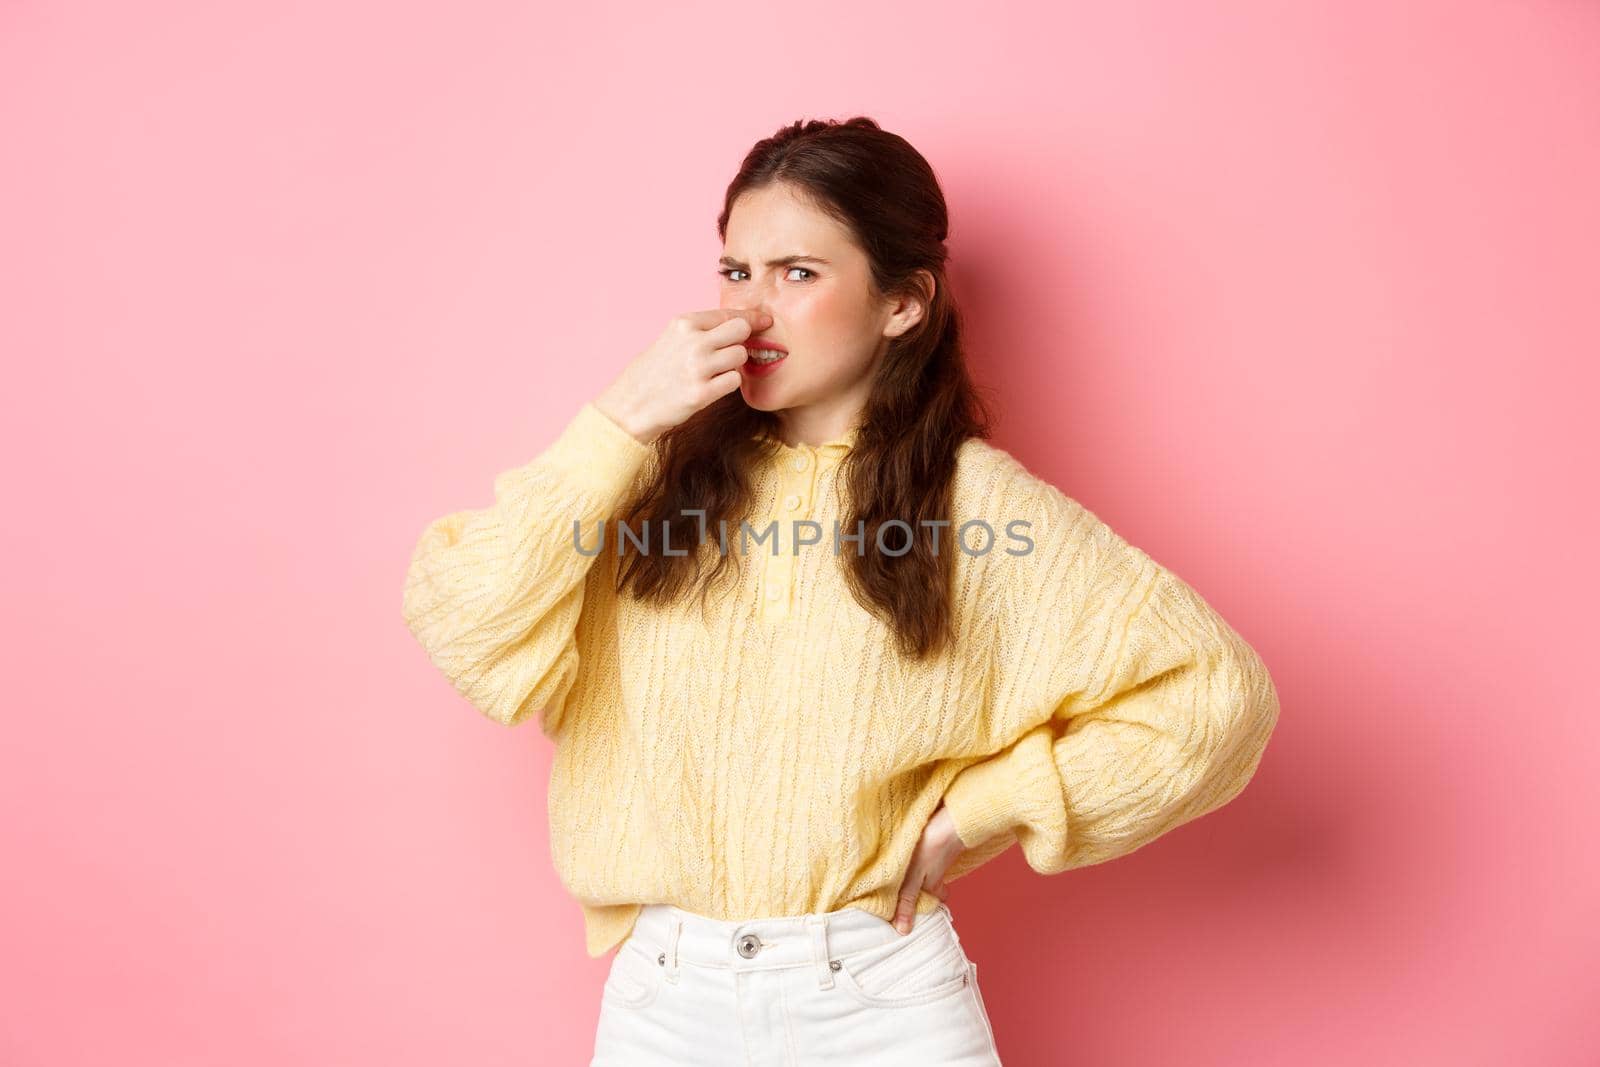 It stinks. Disgusted glamour girl shuts her nose from awful smell, look accusingly at camera, something reek bad, standing over pink background. Copy space